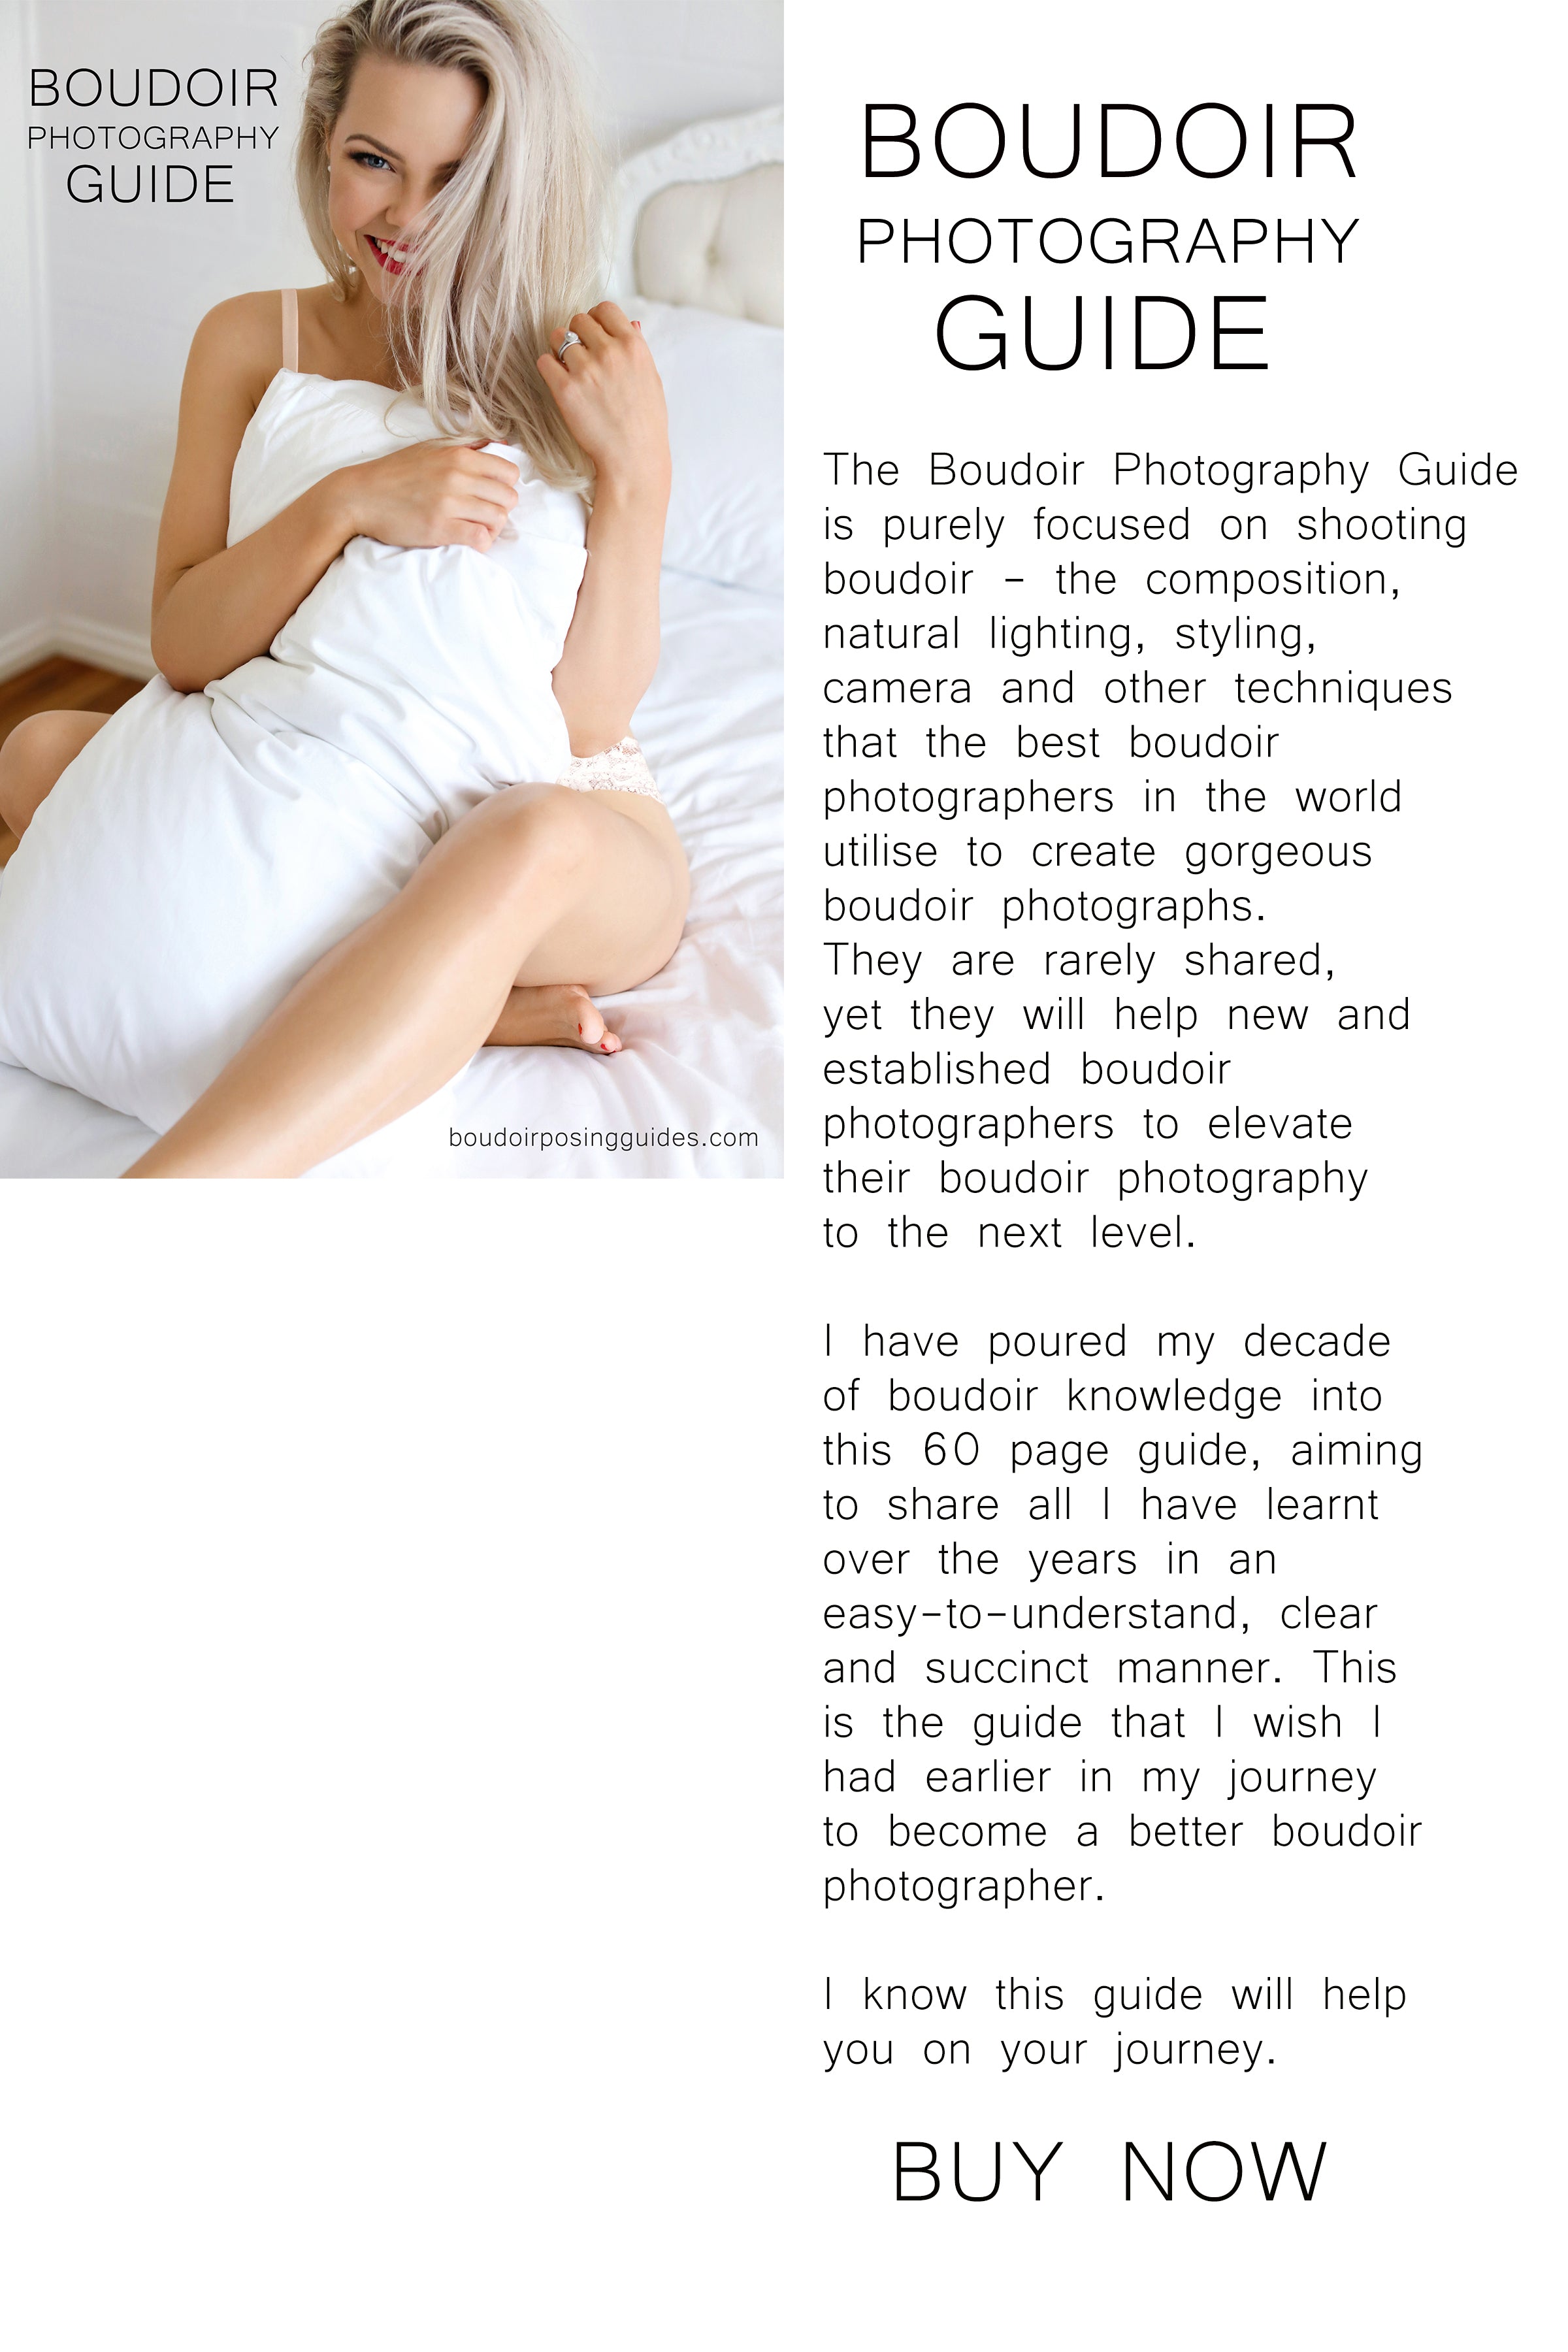 8 Beginner Boudoir Photography MISTAKES and How to Fix Them - YouTube